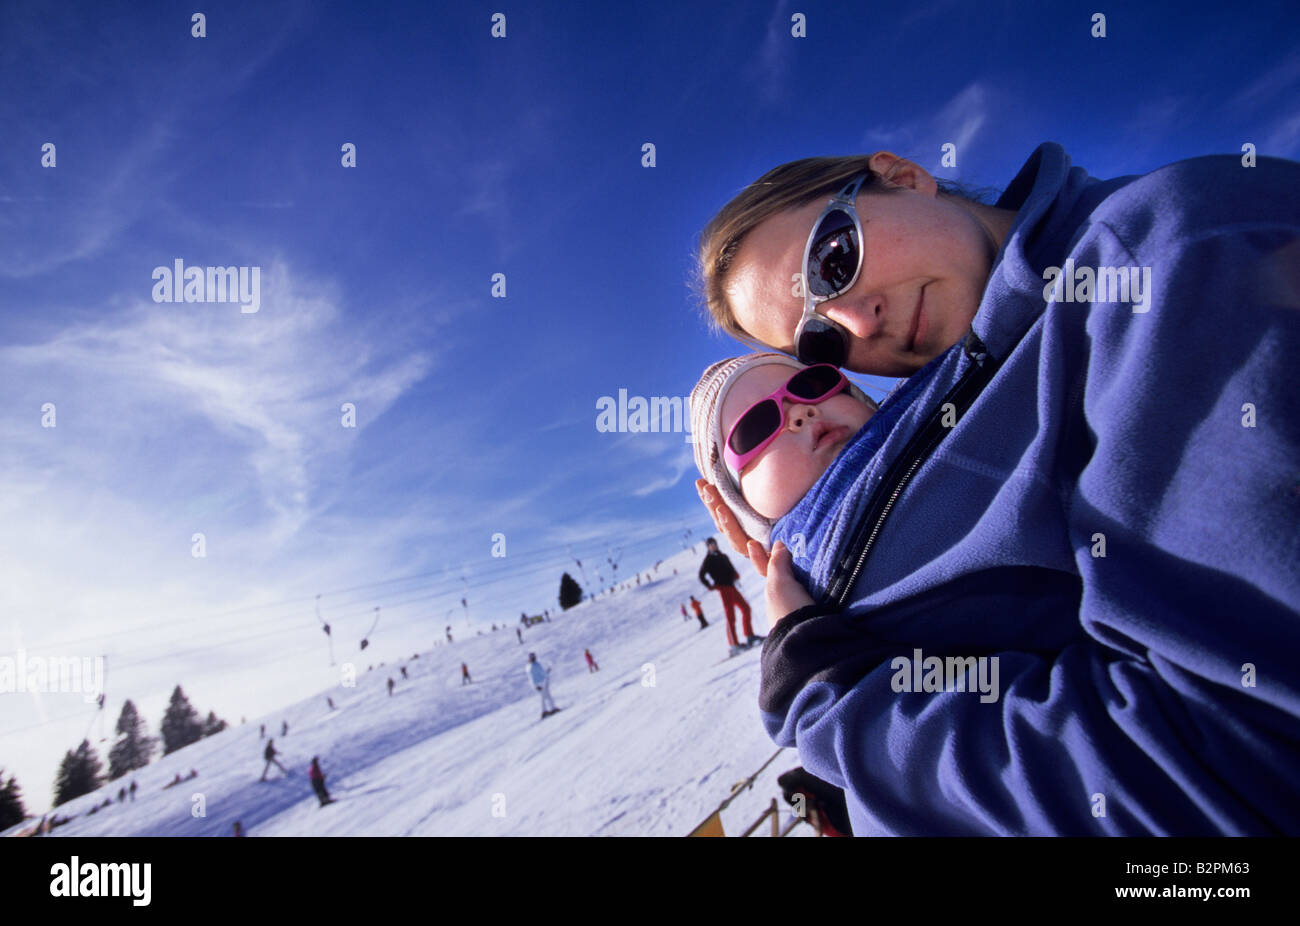 Mother and baby daughter with sunglasses enjoying a sunny day at a Ski Resort Feldberg Germany January 2008 Stock Photo